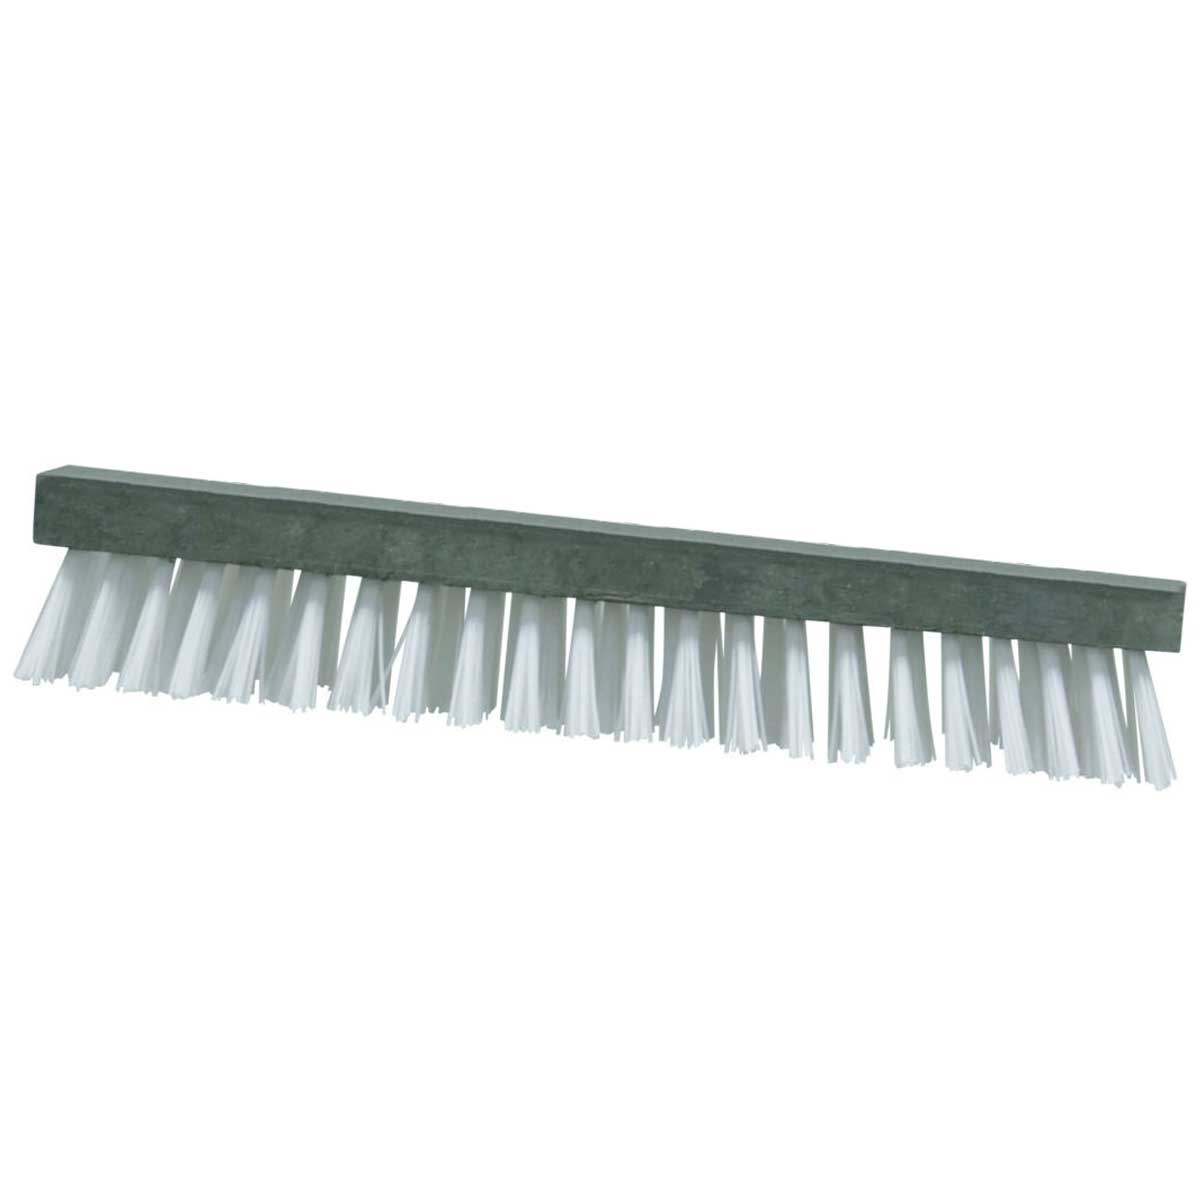 Replacement brush for cattle & cow brush